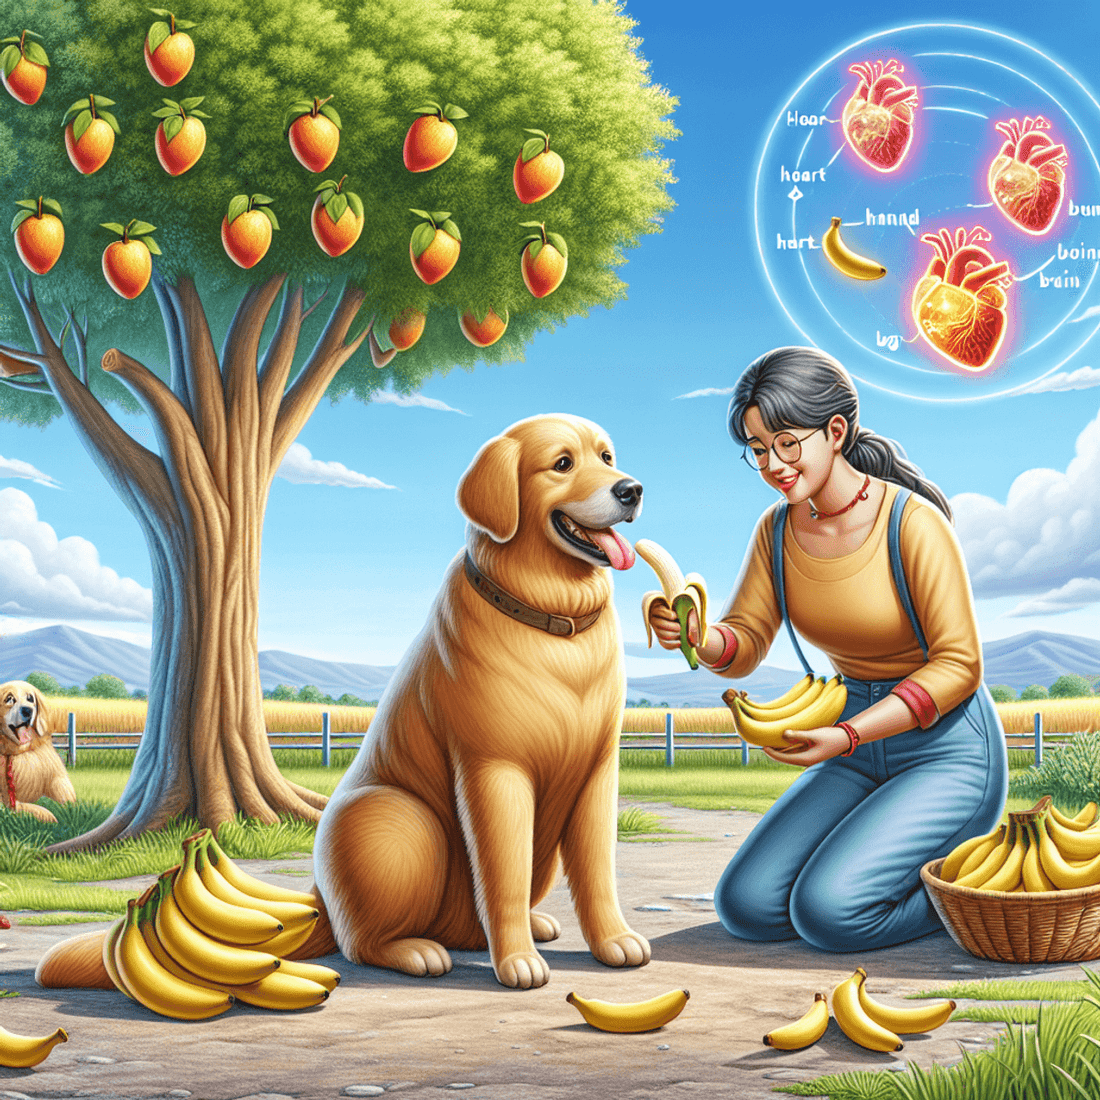 A Hispanic woman feeds her Golden Retriever a banana while a bunch of bananas and a diagram of a dog's body glowing with symbols for heart, bone, and brain are nearby. A prominent banana tree stands under a clear sky.